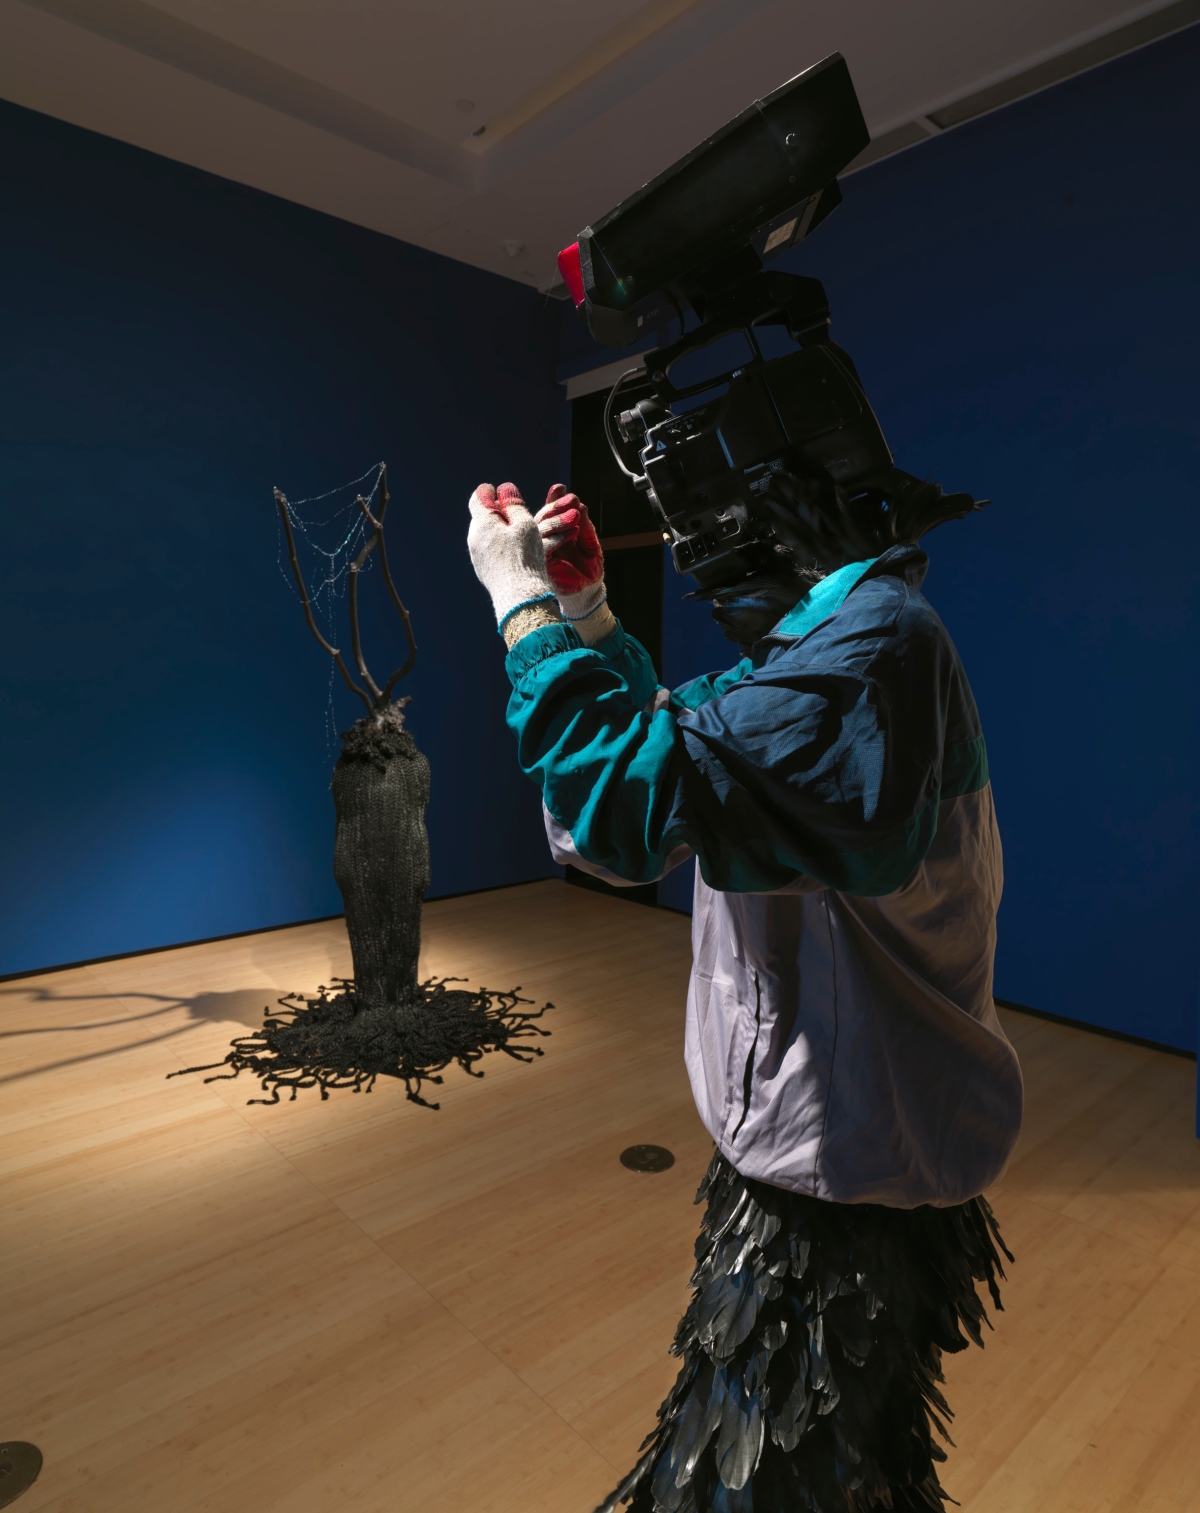 Installation view of Asia Society Triennial: "We Do Not Dream Alone" at Asia Society Museum, New York, October 27, 2020 to June 27, 2021. From left to right: Minouk Lim, Hydra, 2015.; L'Homme a la Camera, 2015; Courtesy of the Artist and Tina Kim Gallery. Photograph: Bruce M. White, 2020.